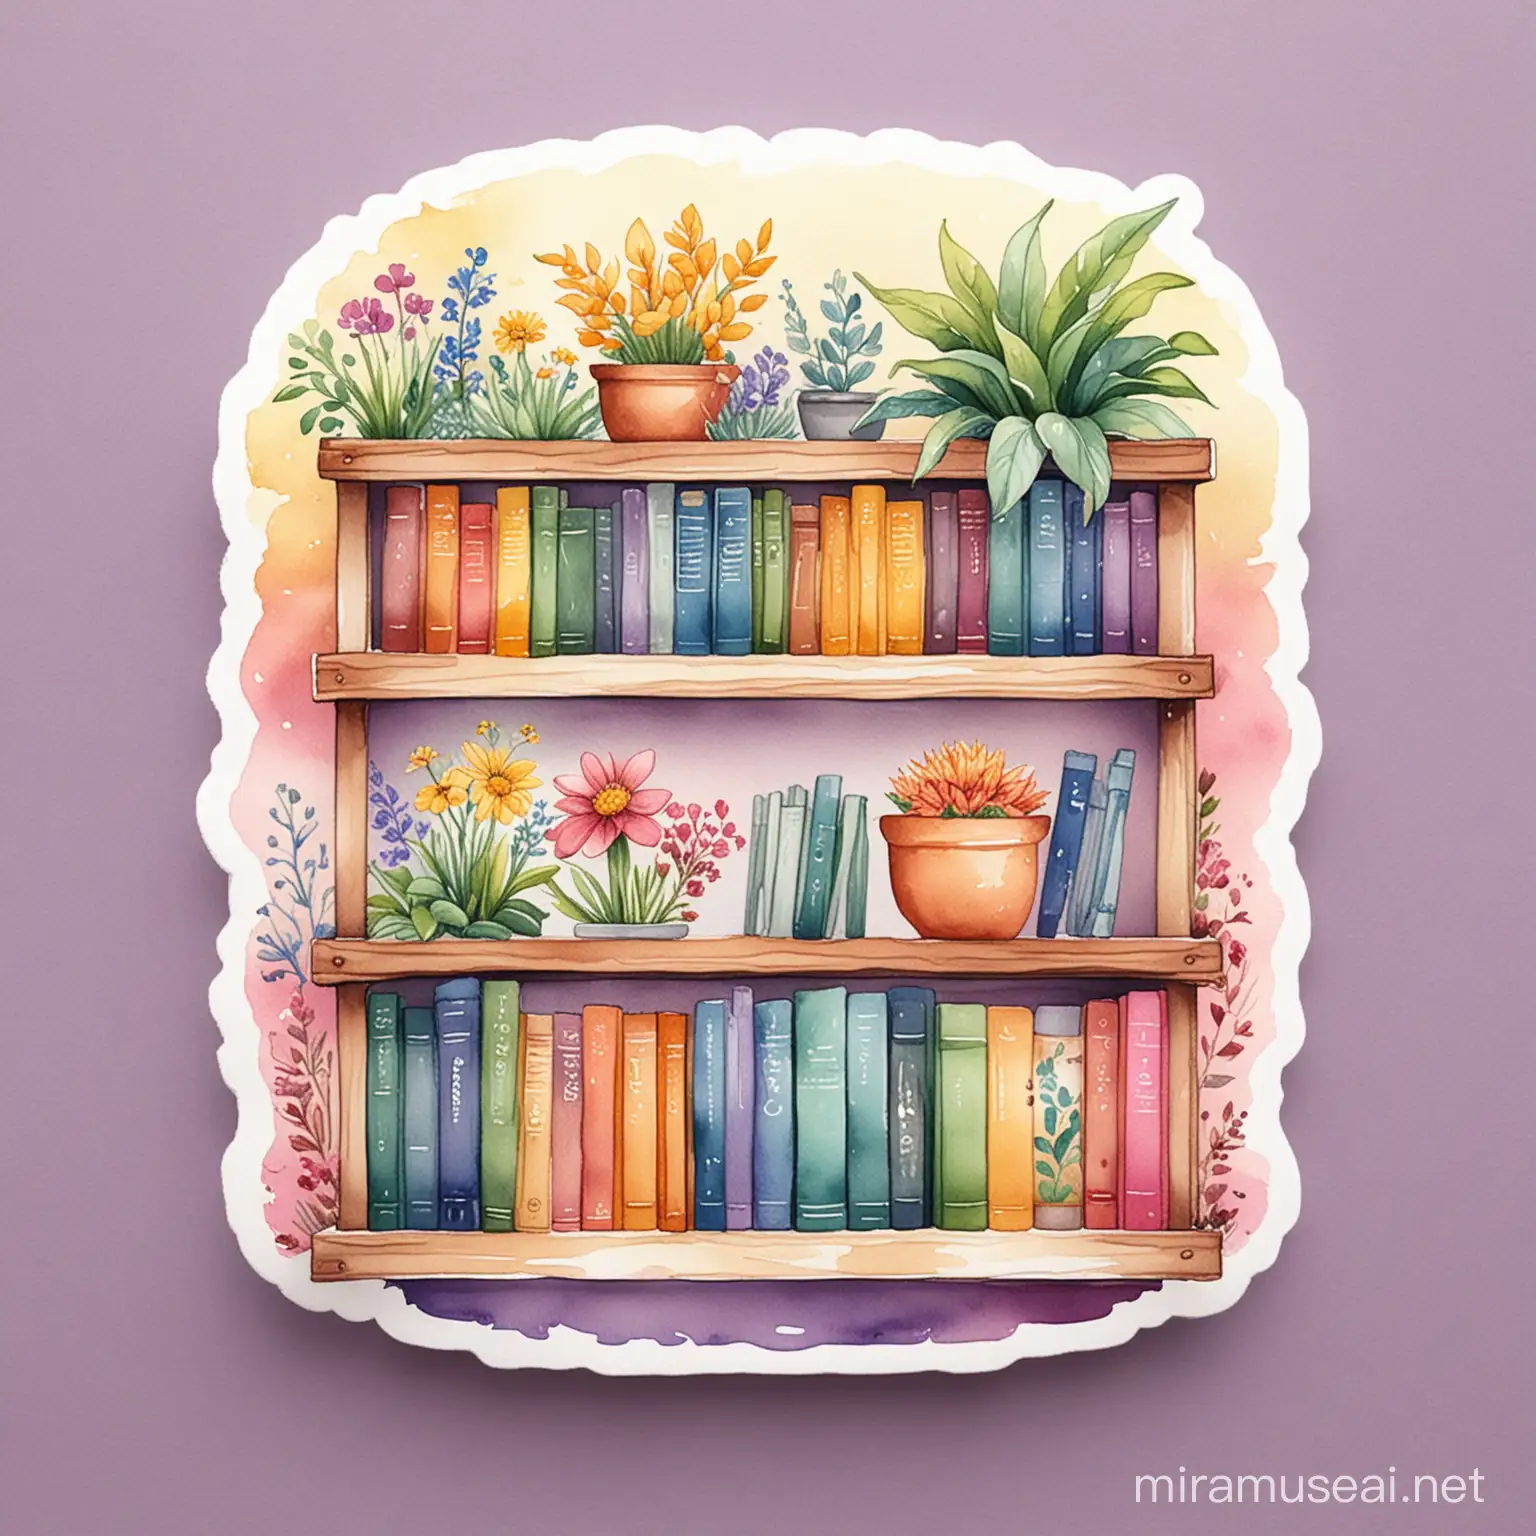 Watercolor Illustration Sticker of Small Bookshelves with Plants and Flowers